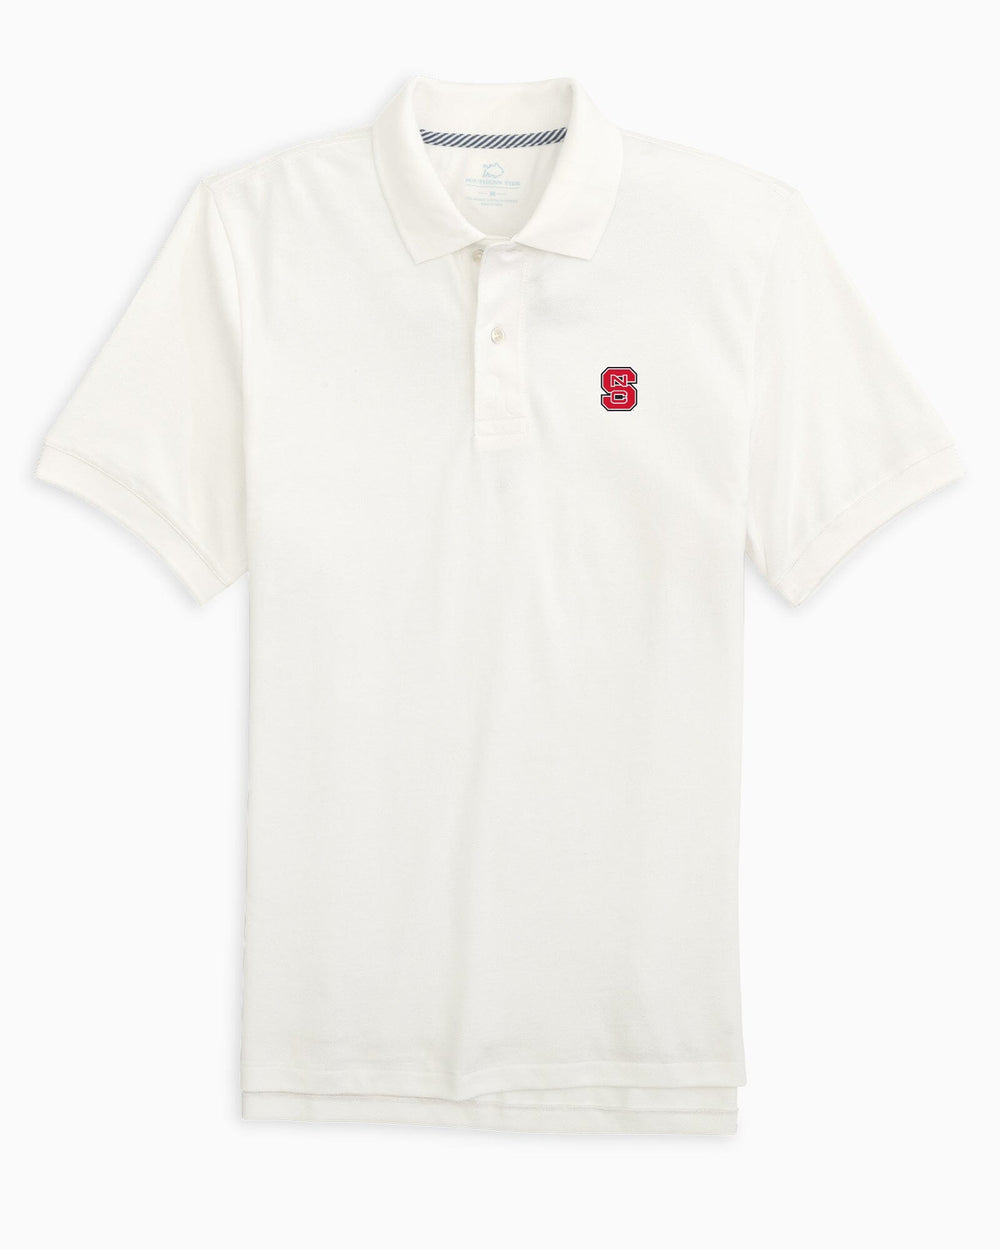 The front view of the NC State Wolfpack New Short Sleeve Skipjack Polo by Southern Tide - Classic White